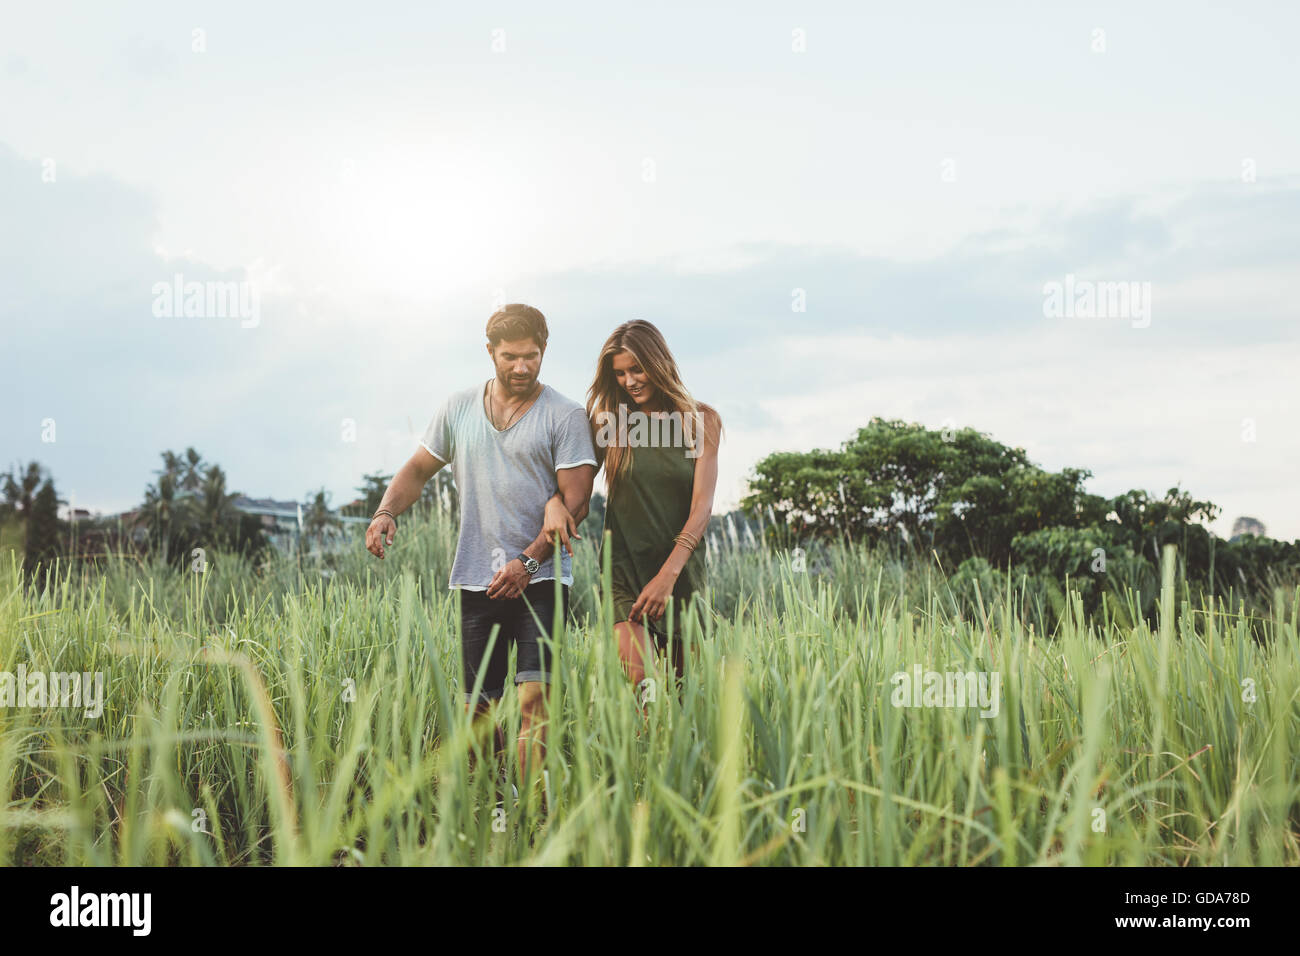 Outdoor shot of young couple walking through grass field. Man and woman walking in nature. Stock Photo